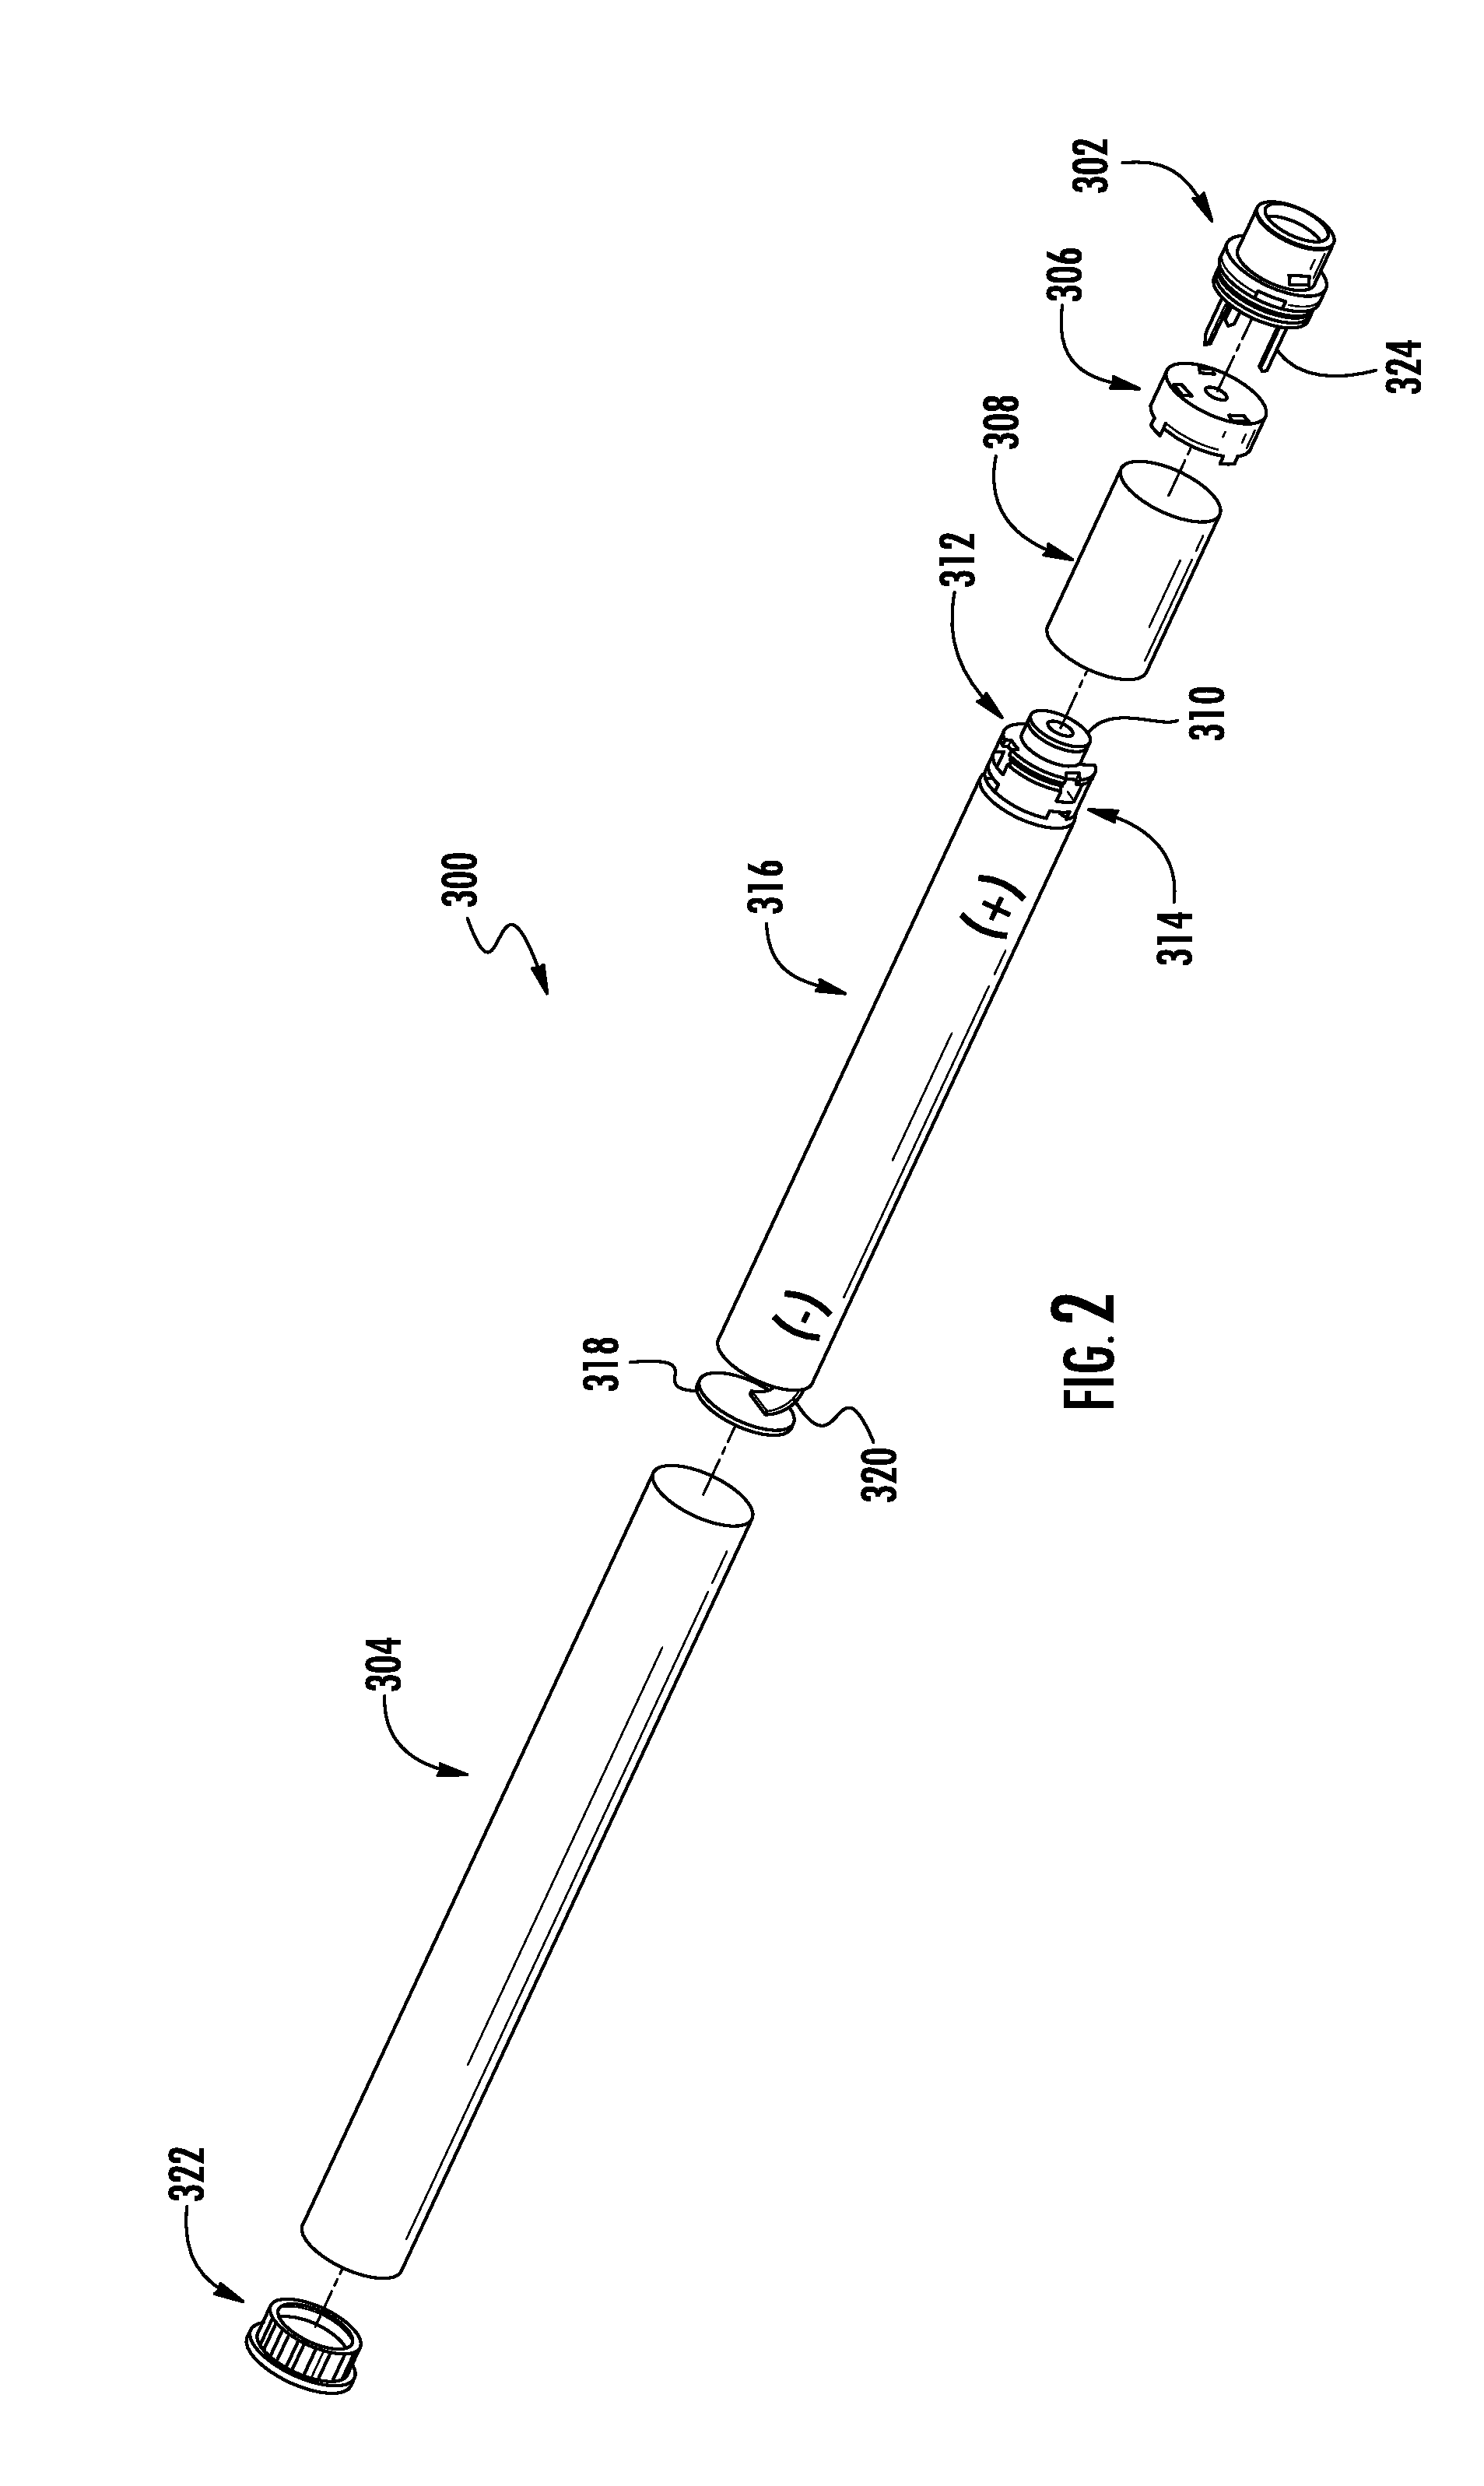 Method for Assembling a Cartridge for a Smoking Article